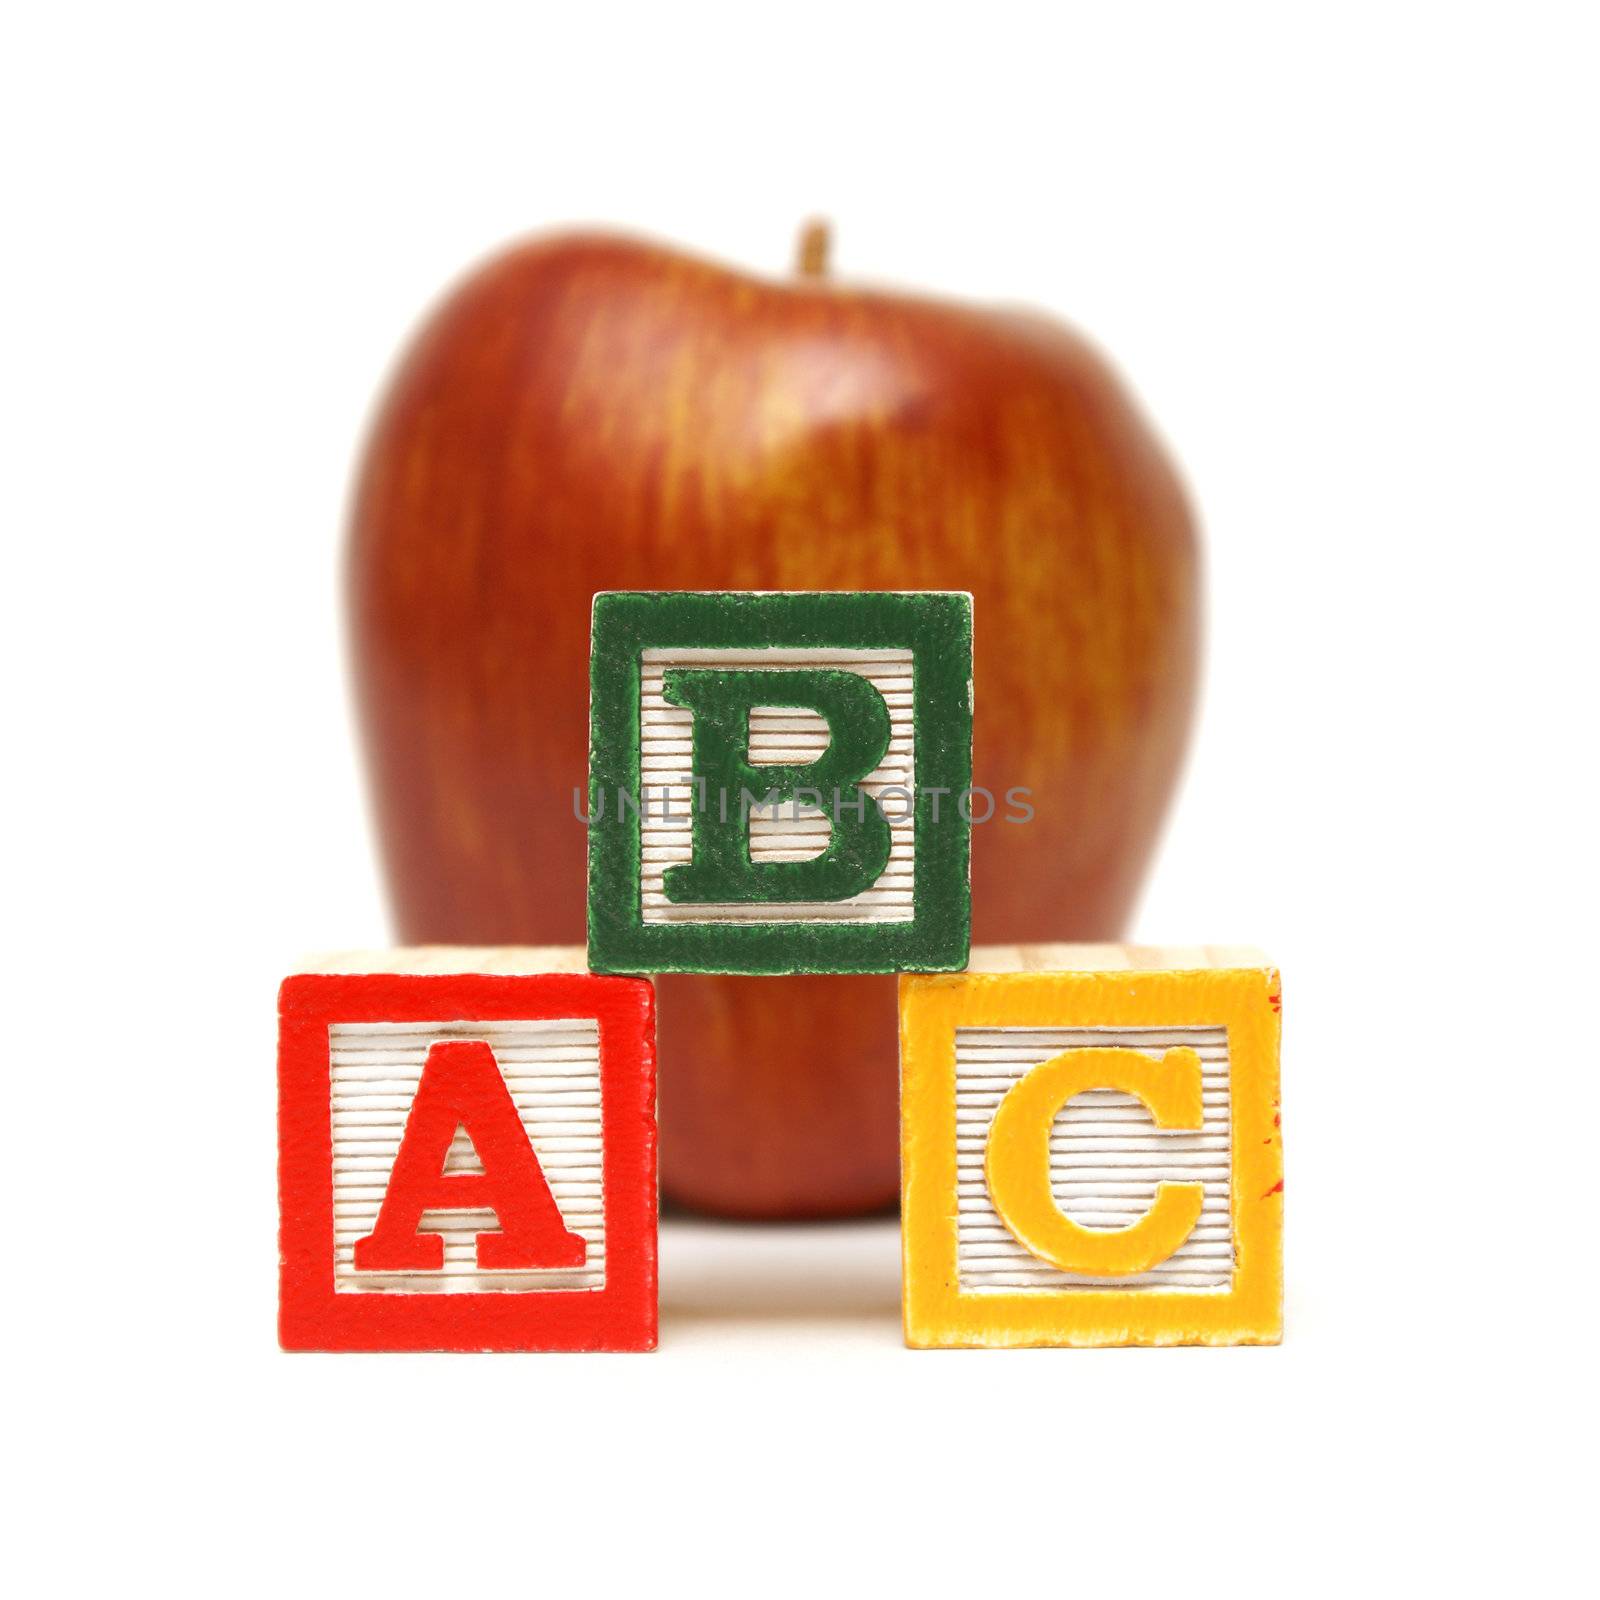 Three learning blocks are stacked up in front of a nice red apple for the young mind at work.